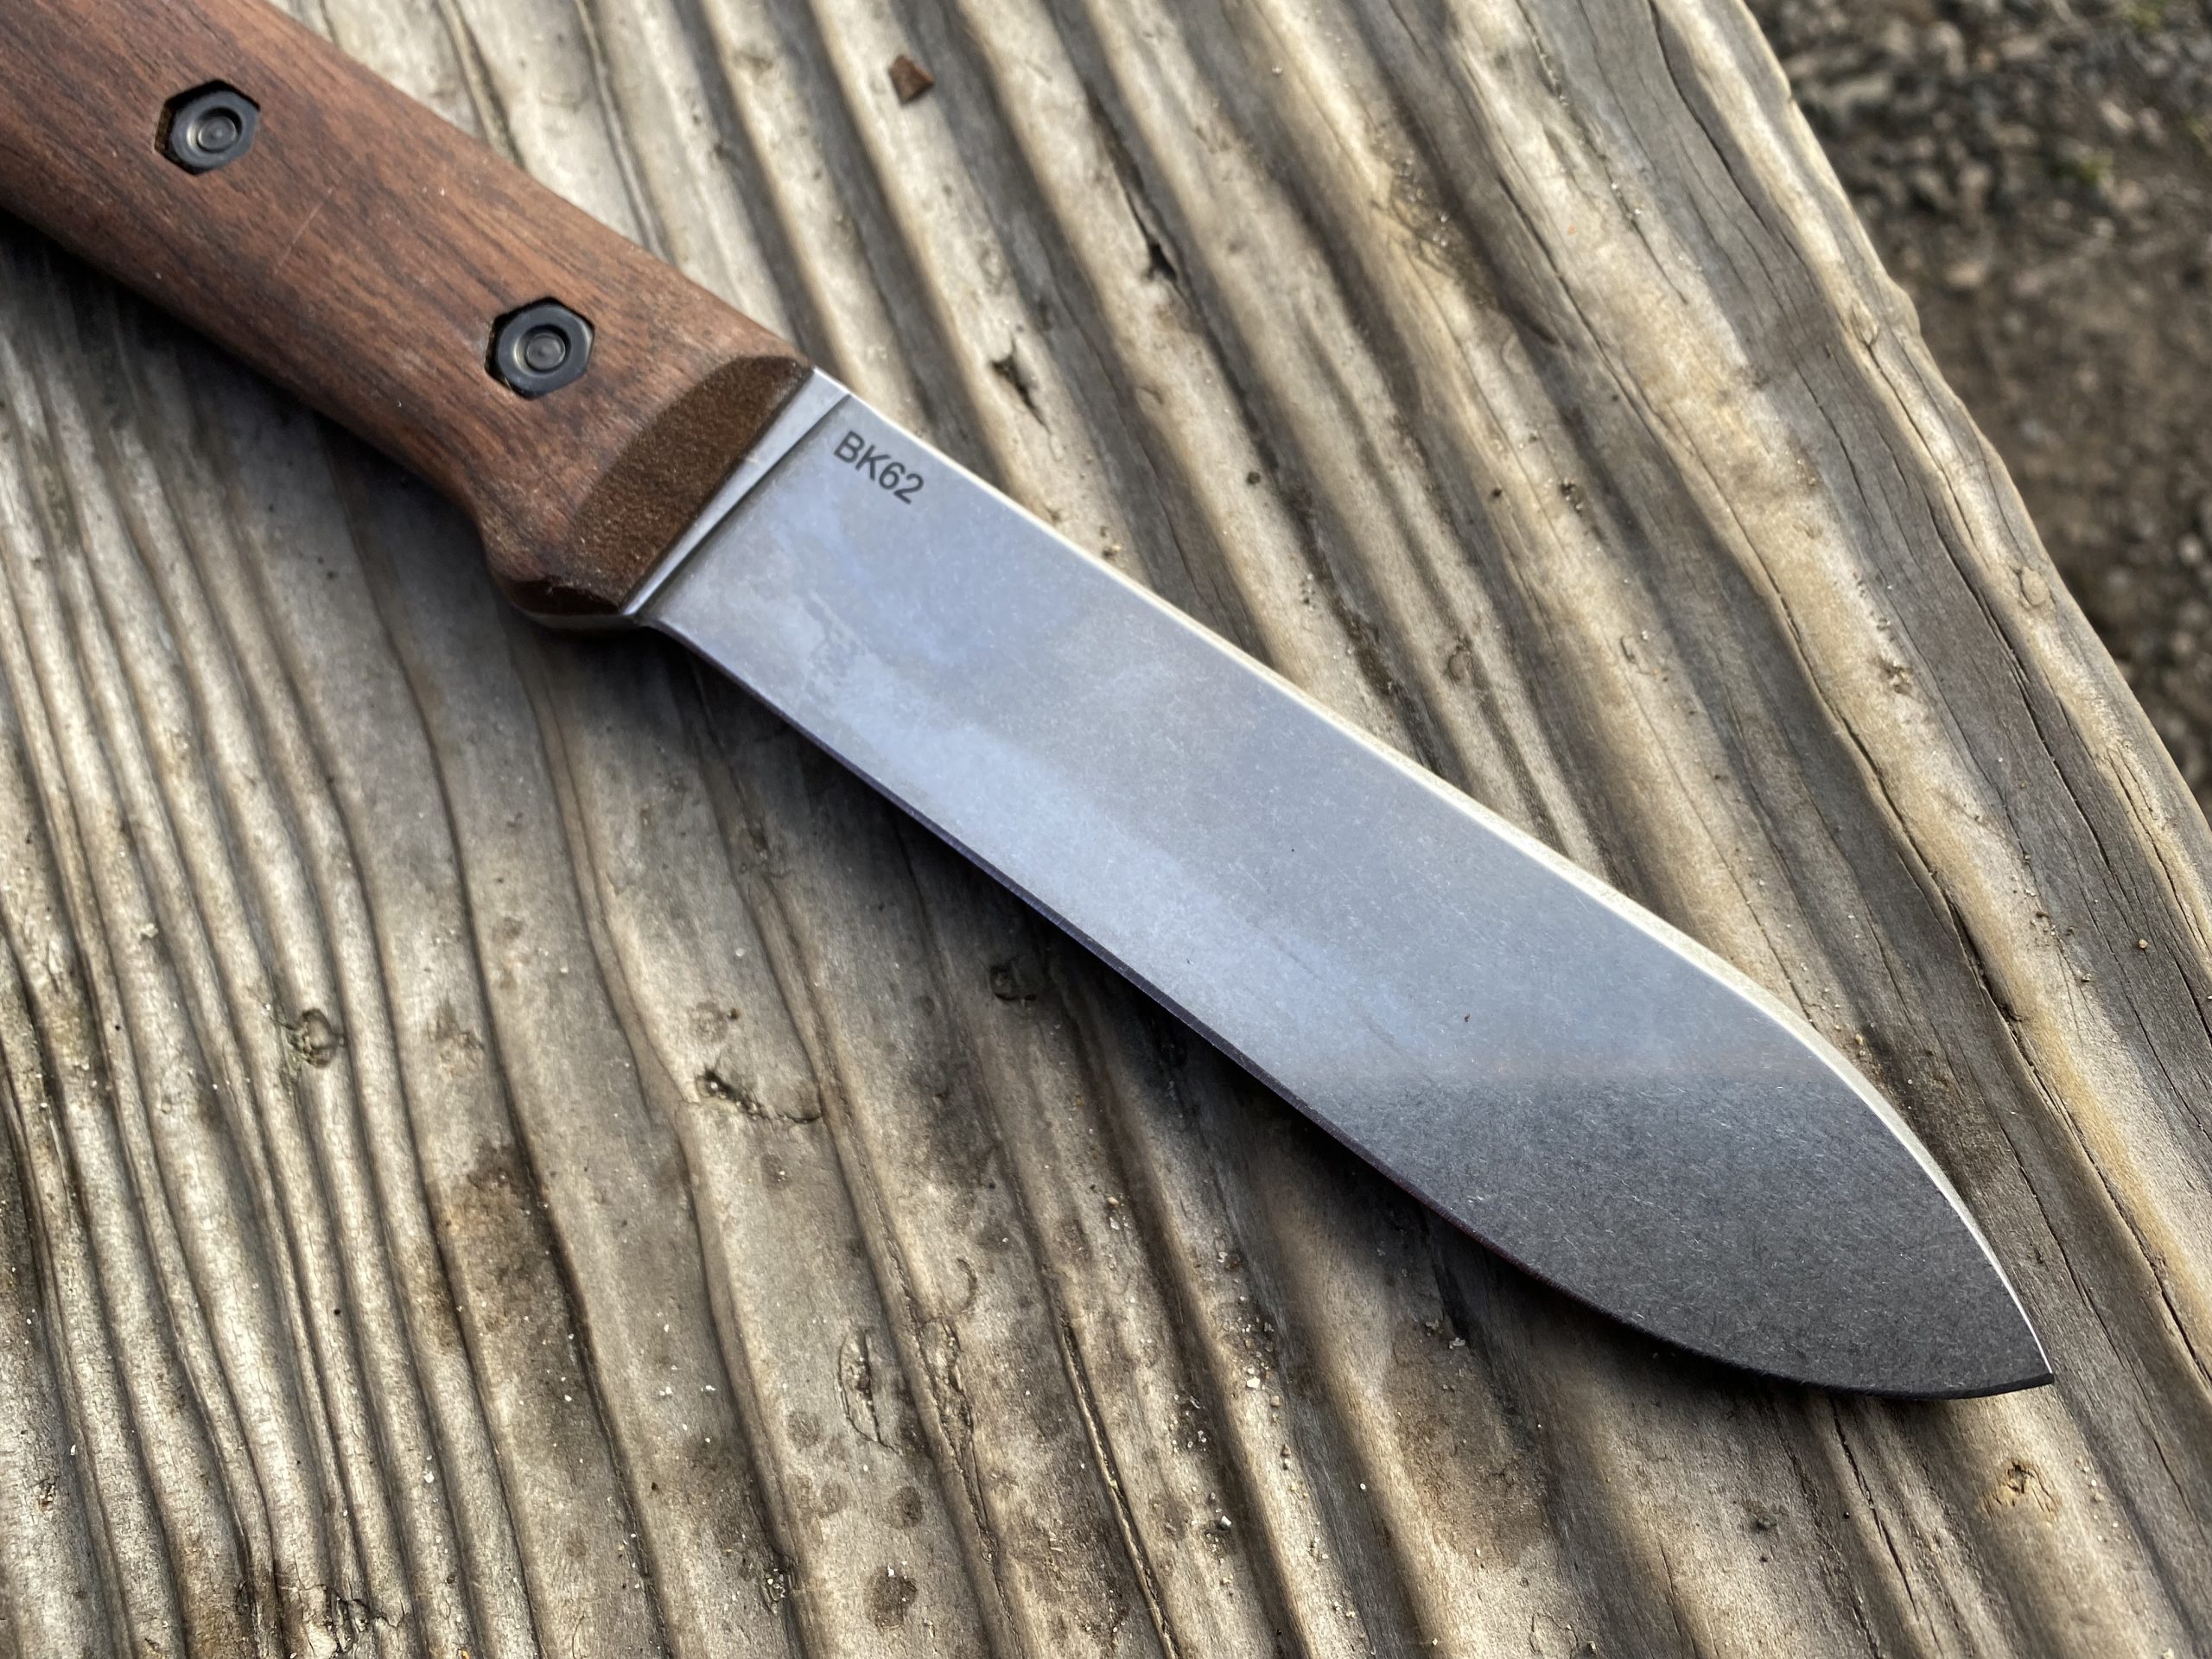 The blade on the Becker is 5.1" long. Not short, but not long, either. 